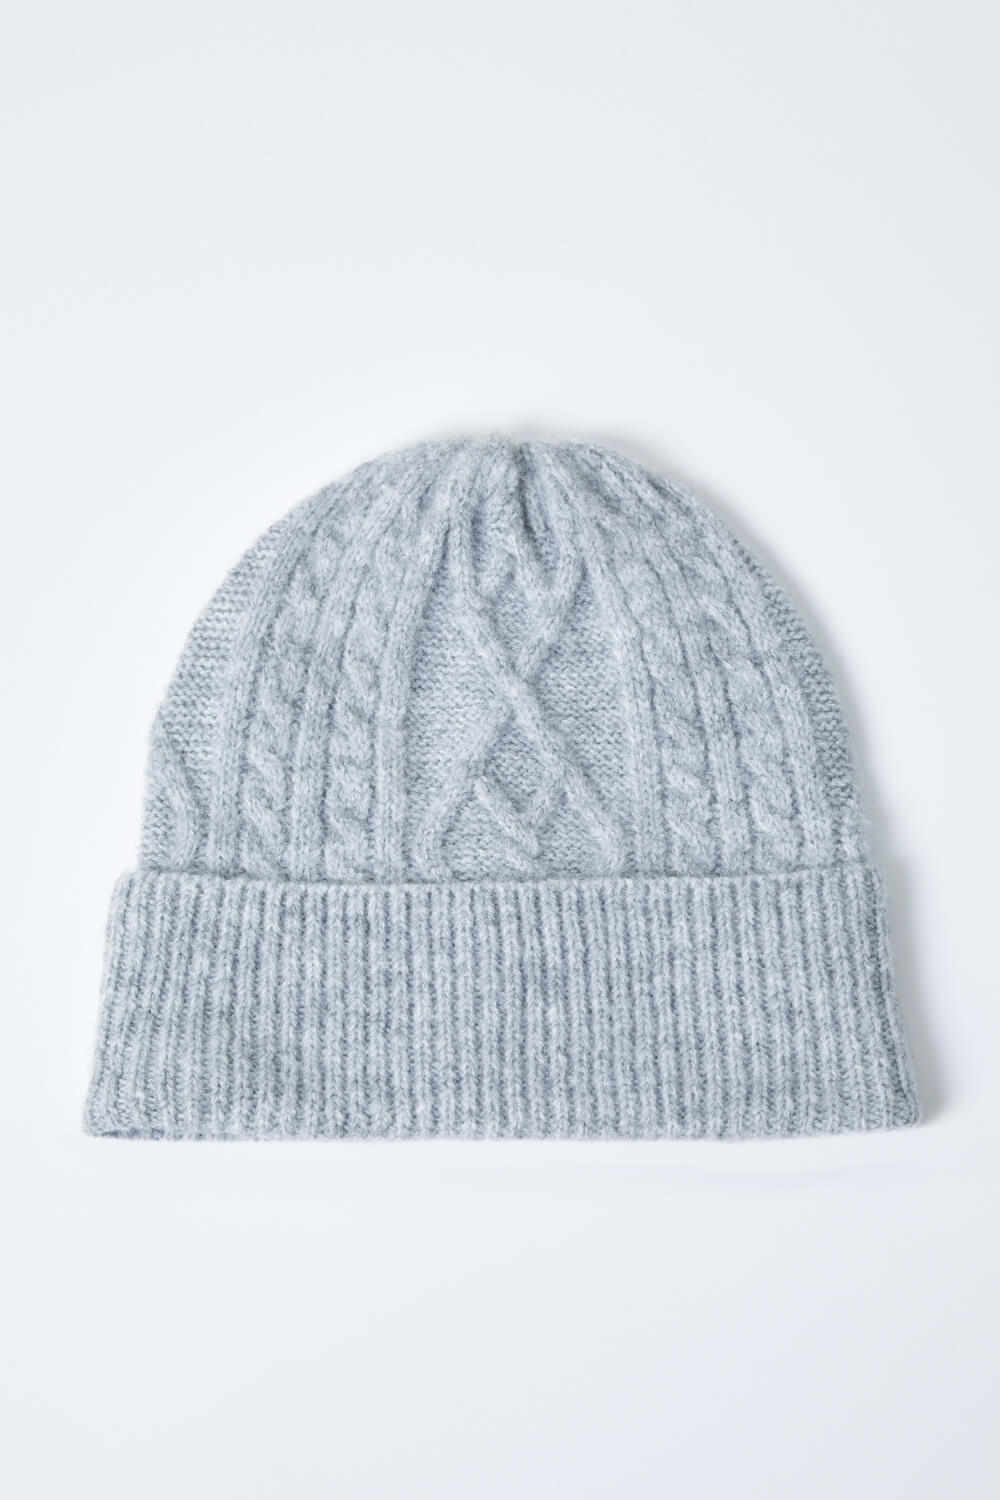 Grey Cable Knit Stretch Hat, Image 5 of 5